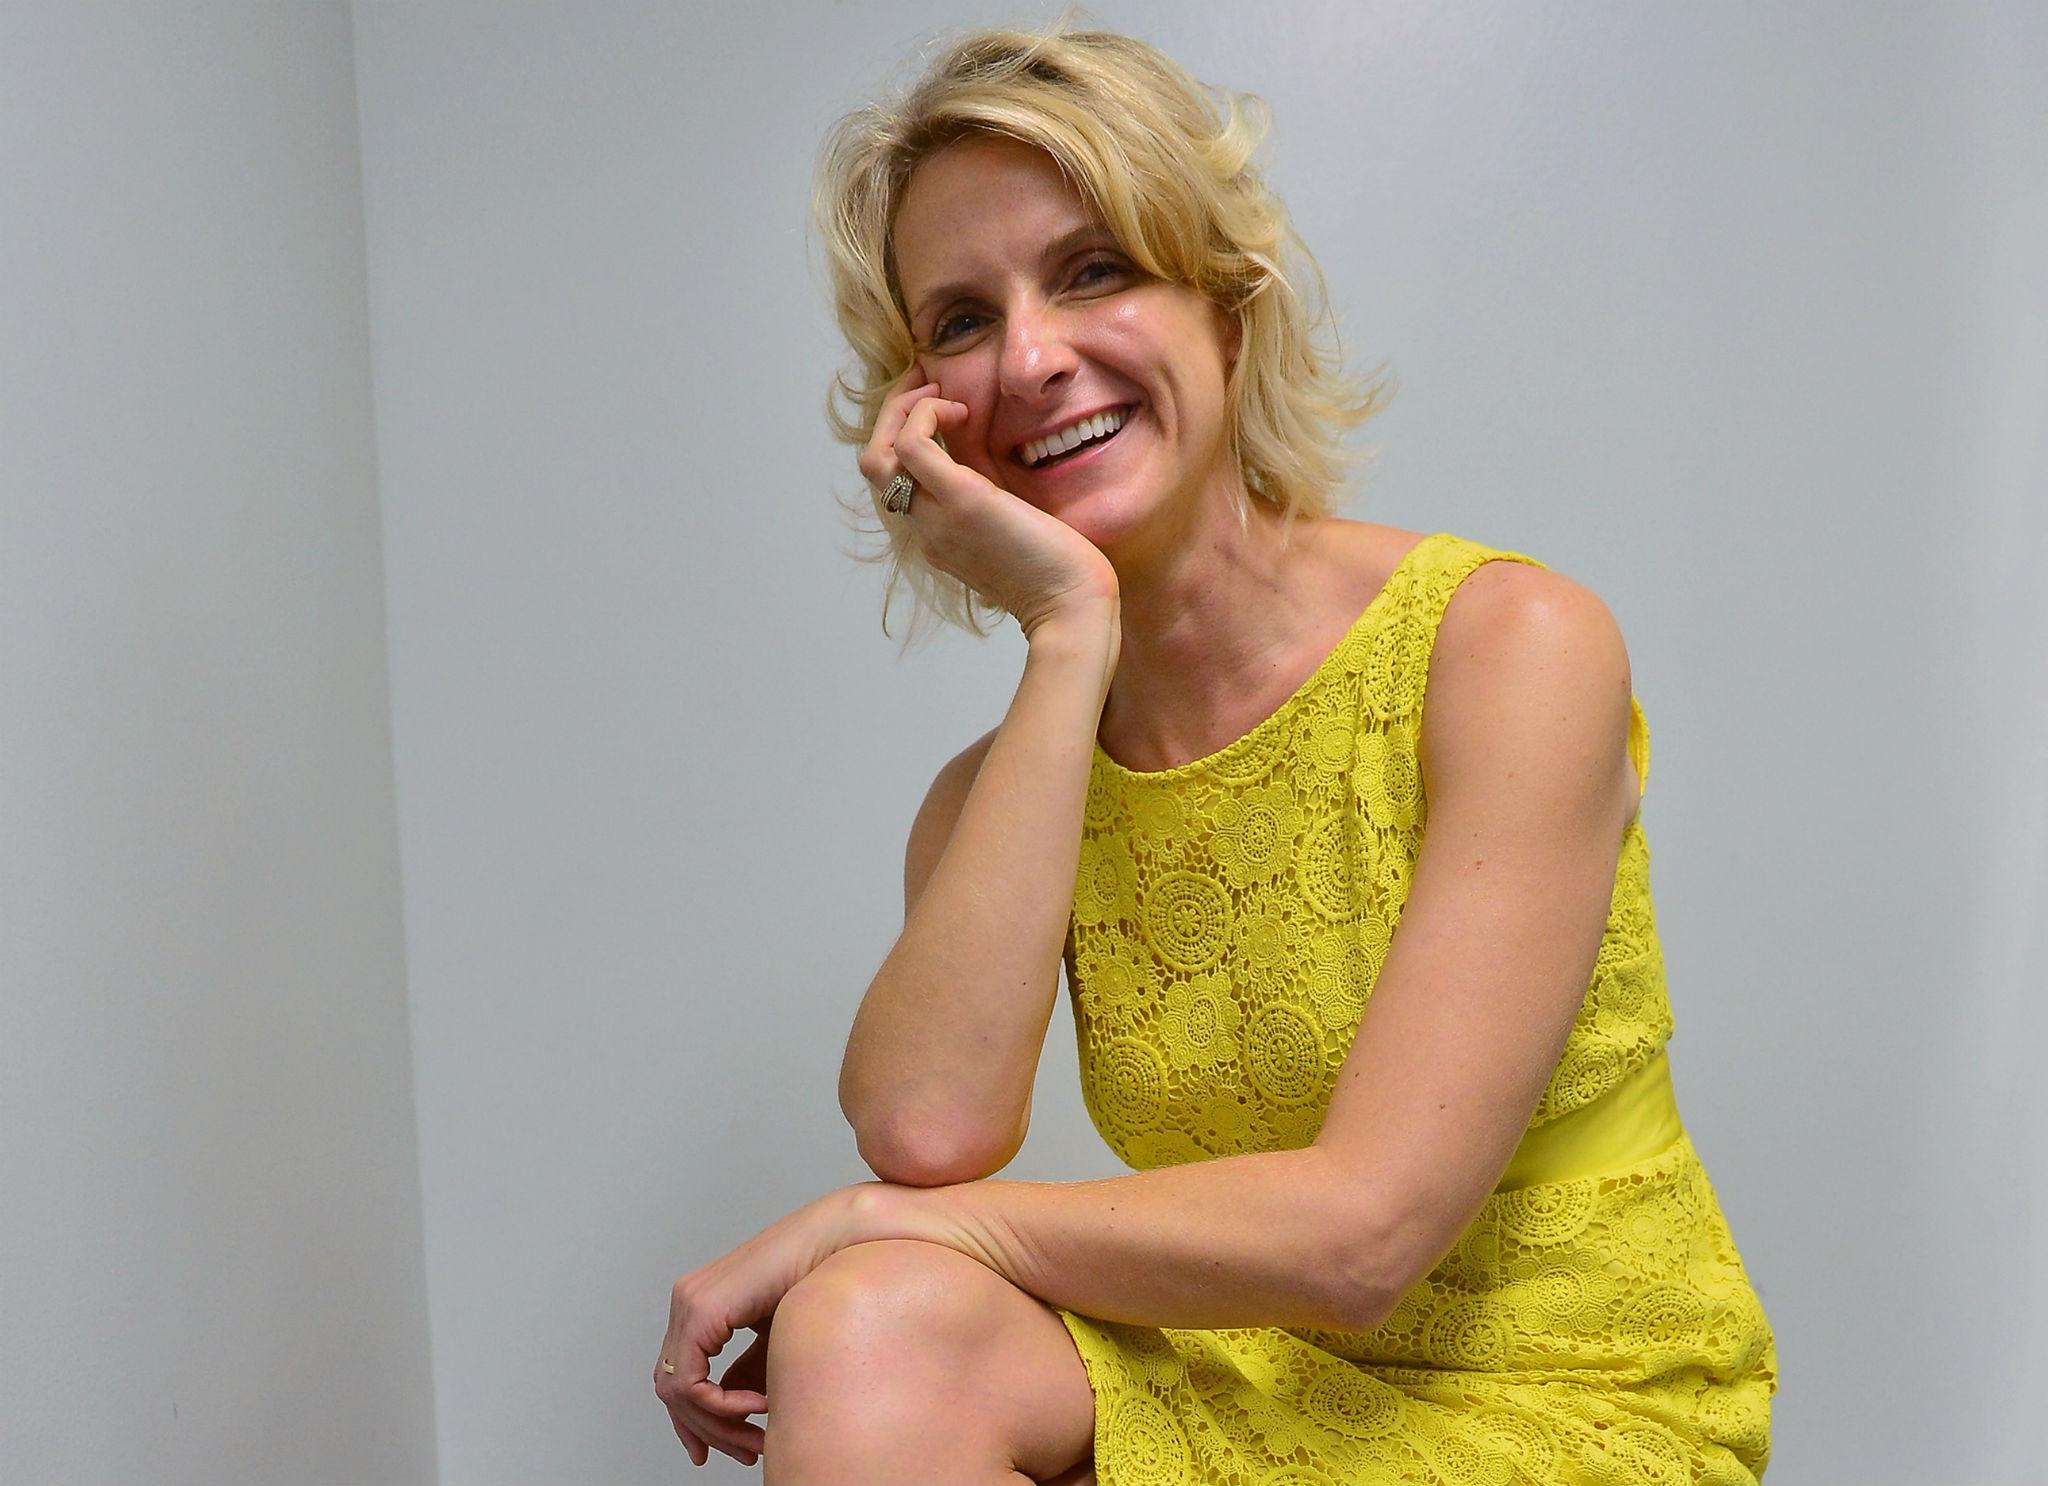 Elizabeth Gilbert, whose most recent book is the self-help tome Big Magic: Creative Living Beyond Fear